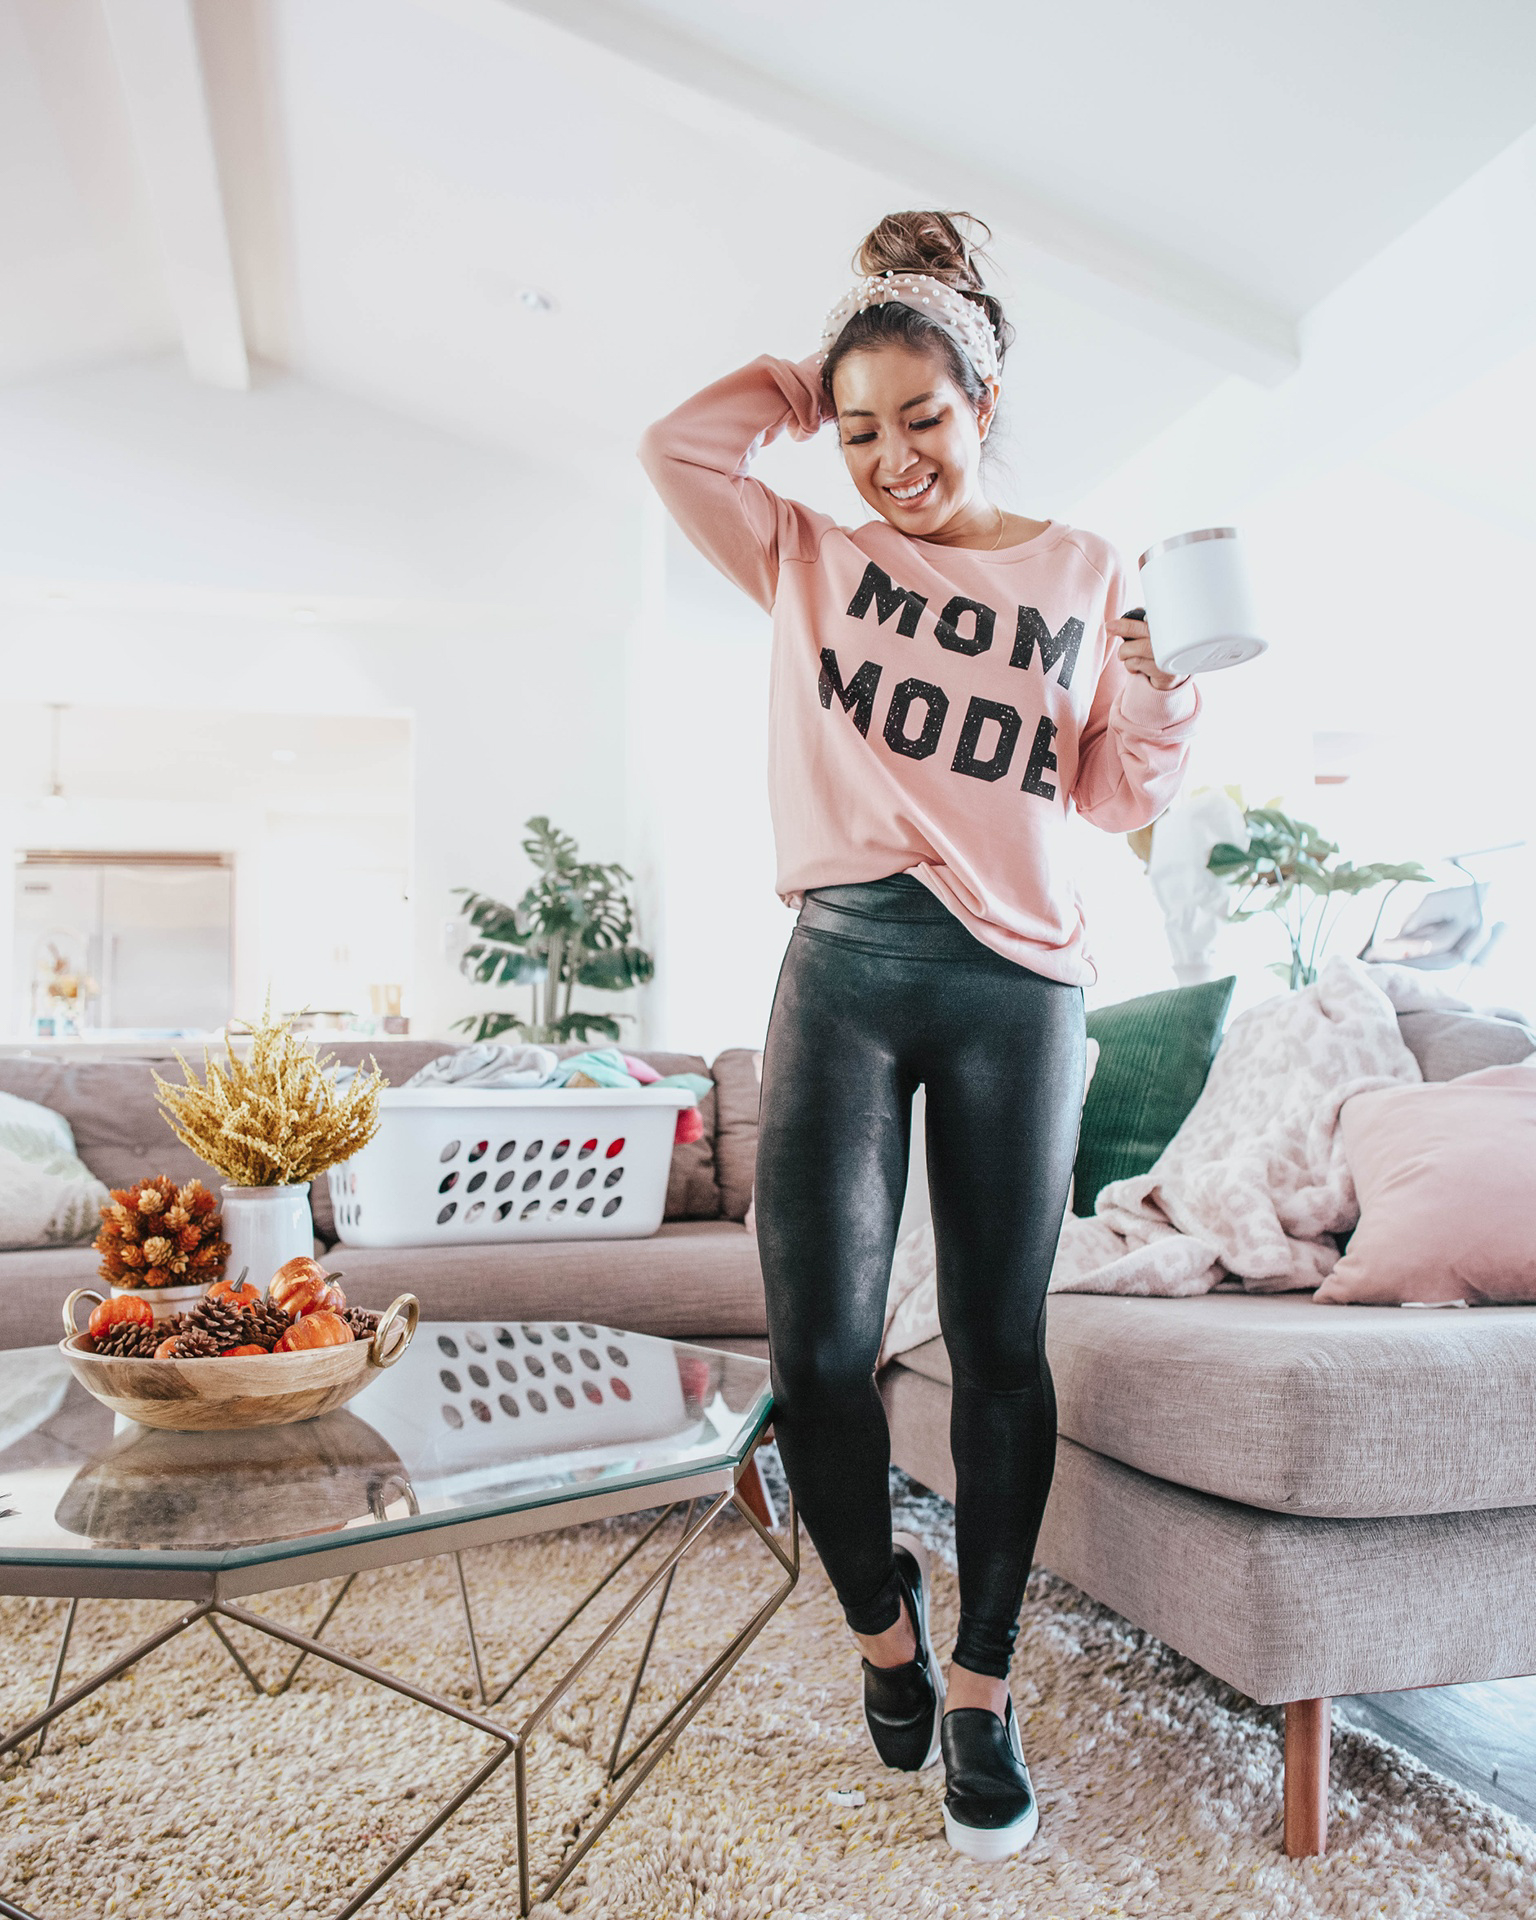 cute & little | dallas fashion mom blogger | mothers day 2020 gift guide ideas | mom mode amazon sweatshirt, spanx faux leather leggings, black slip-on sneakers